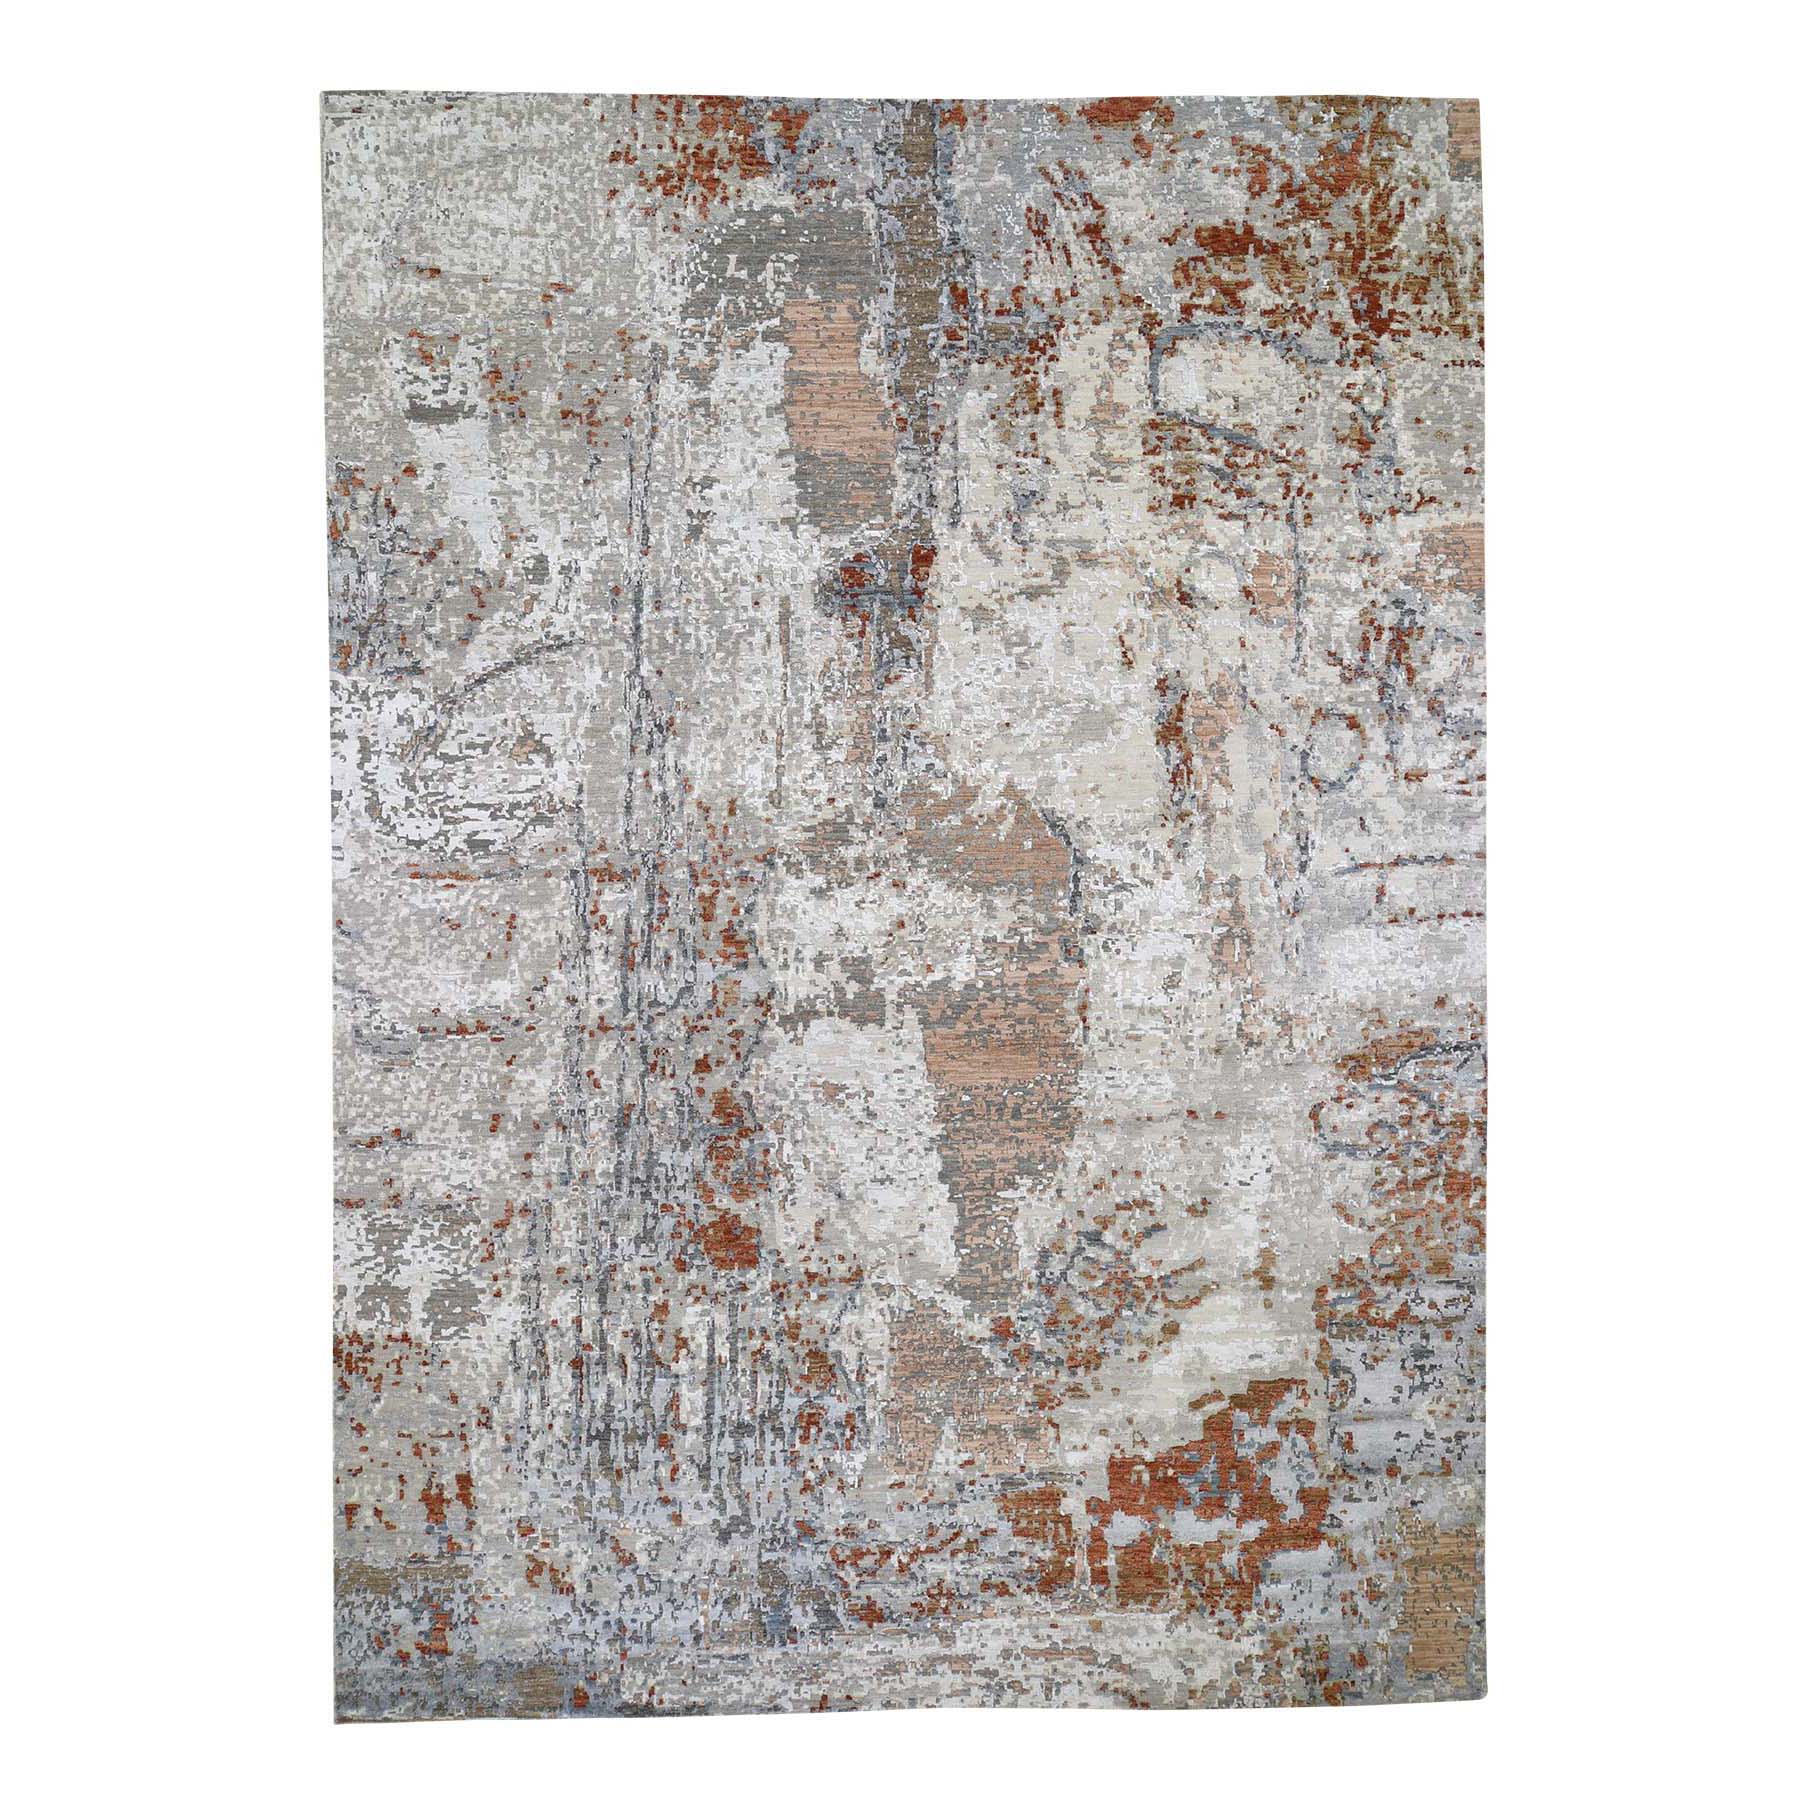 10'x13'10" Silver Hi-Low Pile Abstract Design Wool And Silk Hand Woven Oriental Rug 